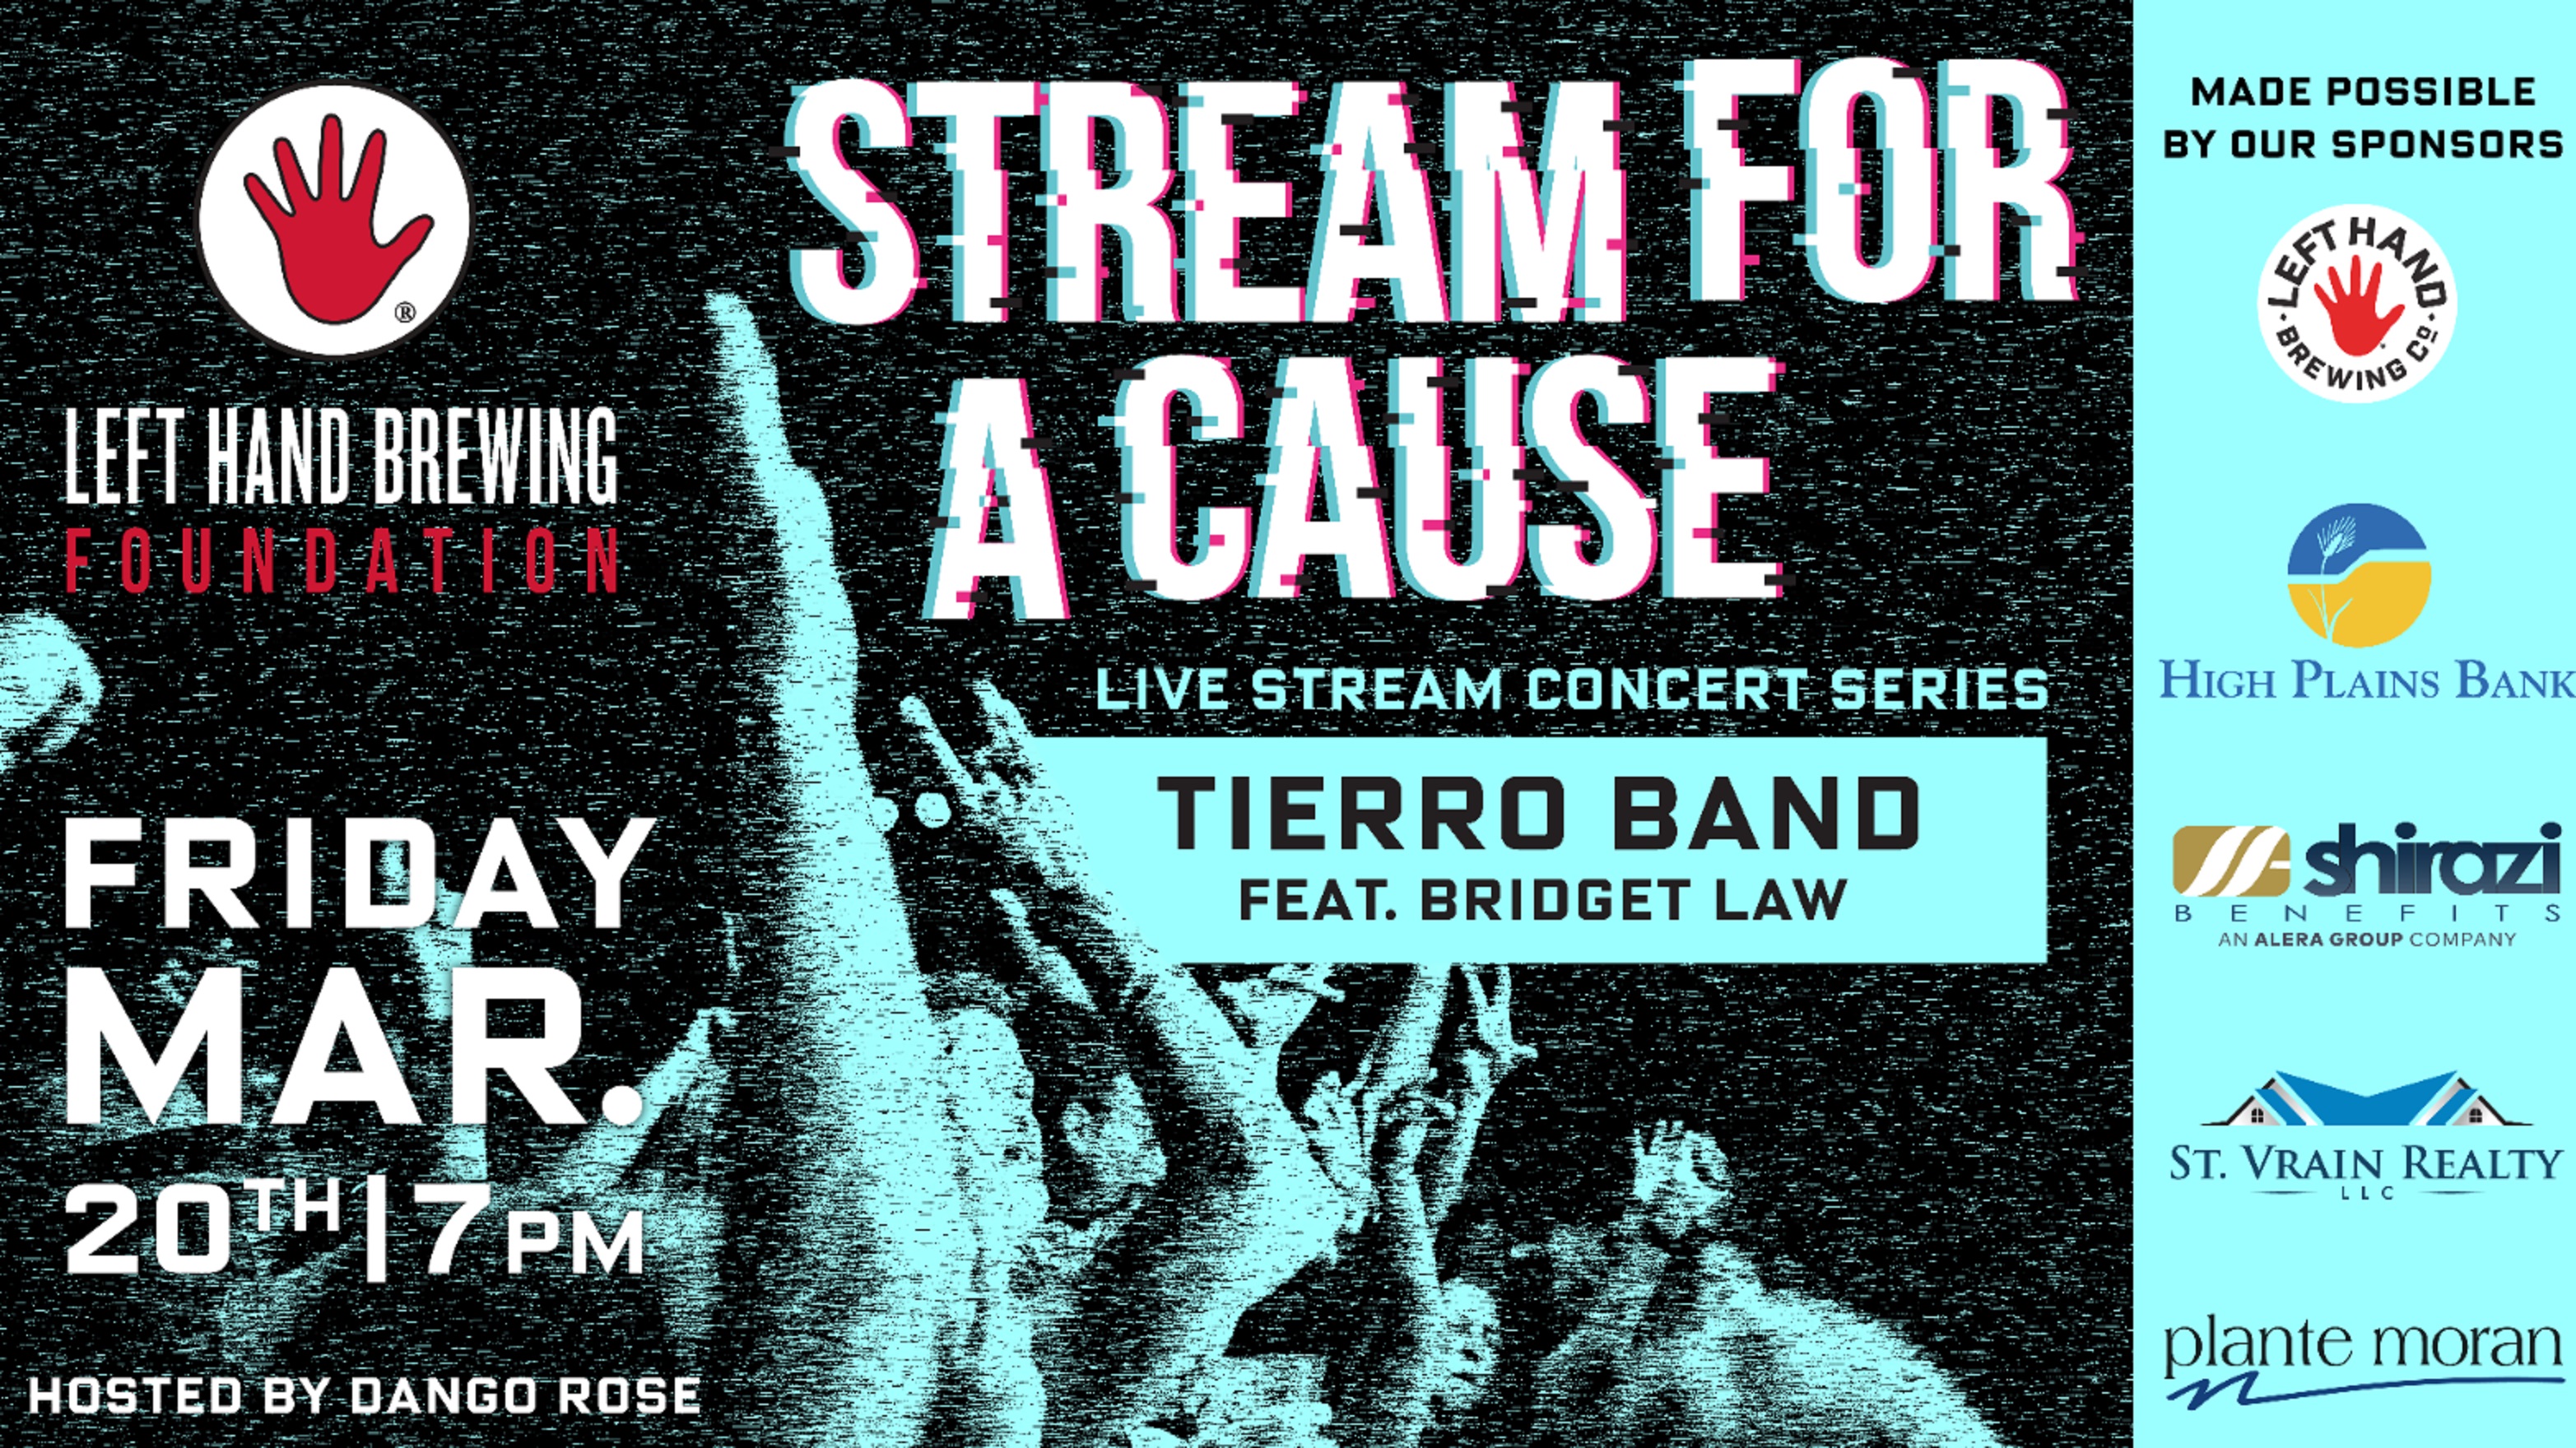 The Left Hand Brewing Foundation Announces ‘Stream for a Cause’